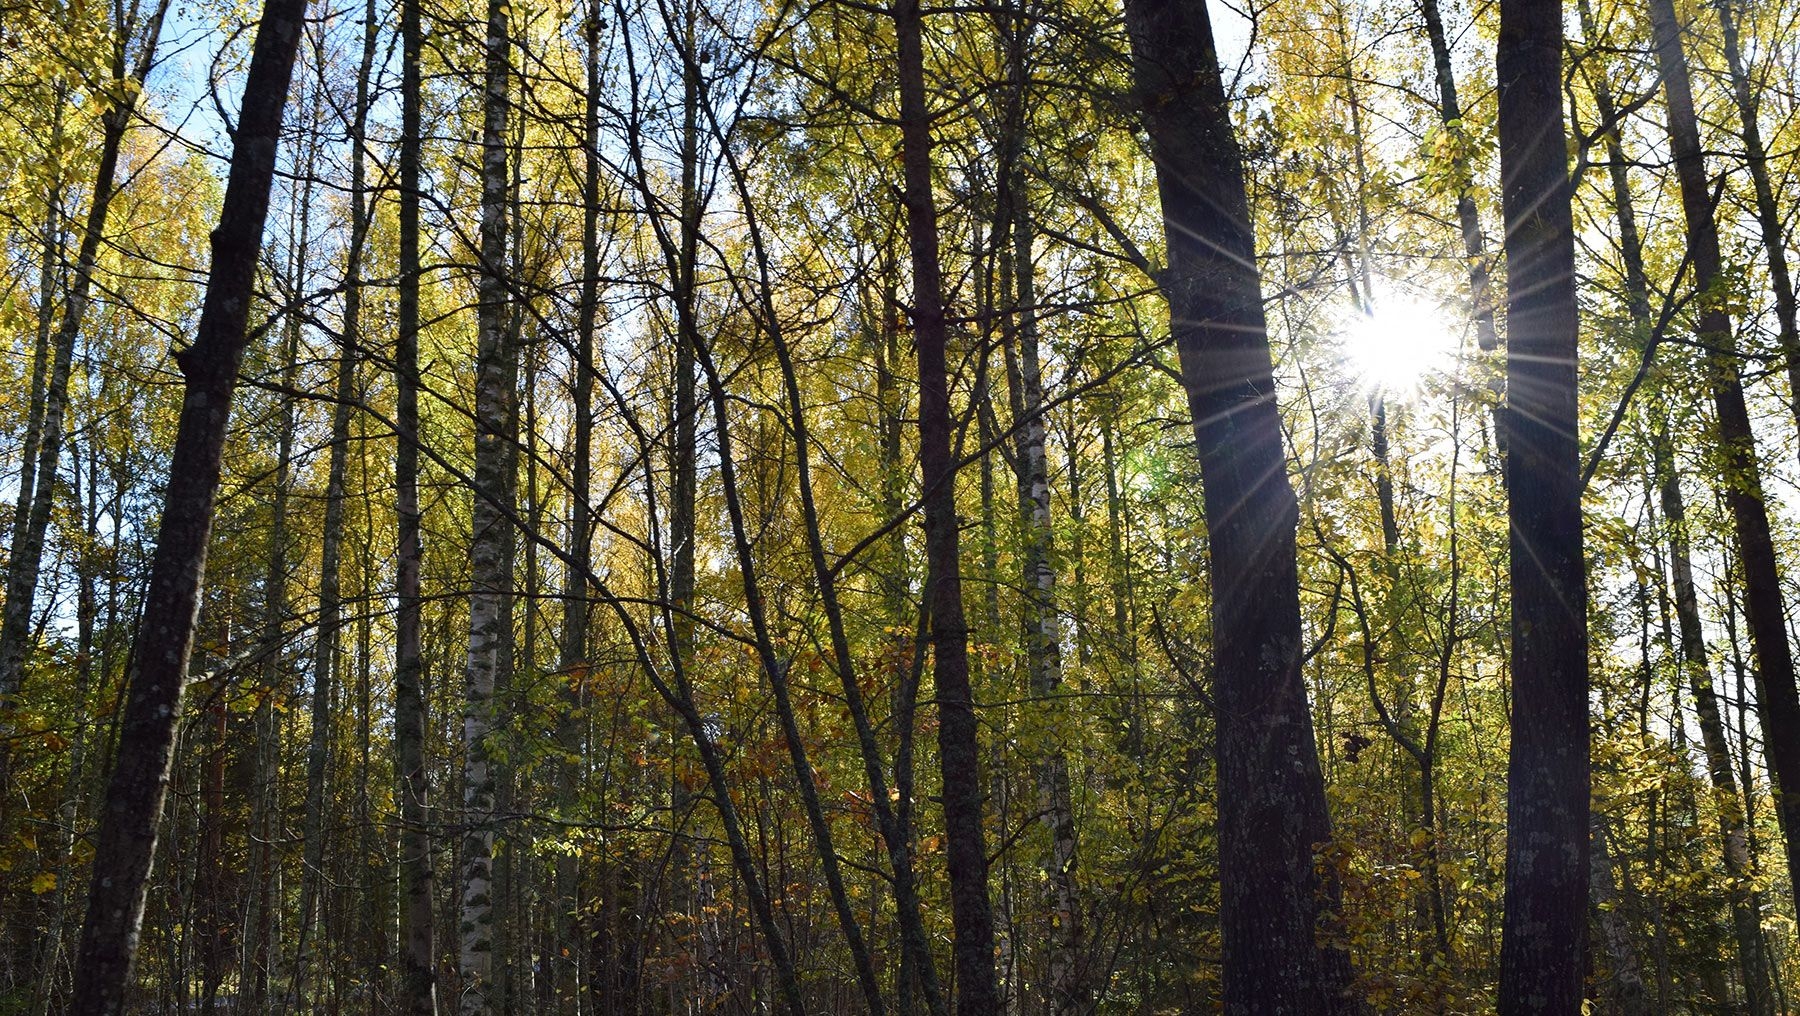 Sunlight shines through the trees in one of Ruissalo's famous forests.